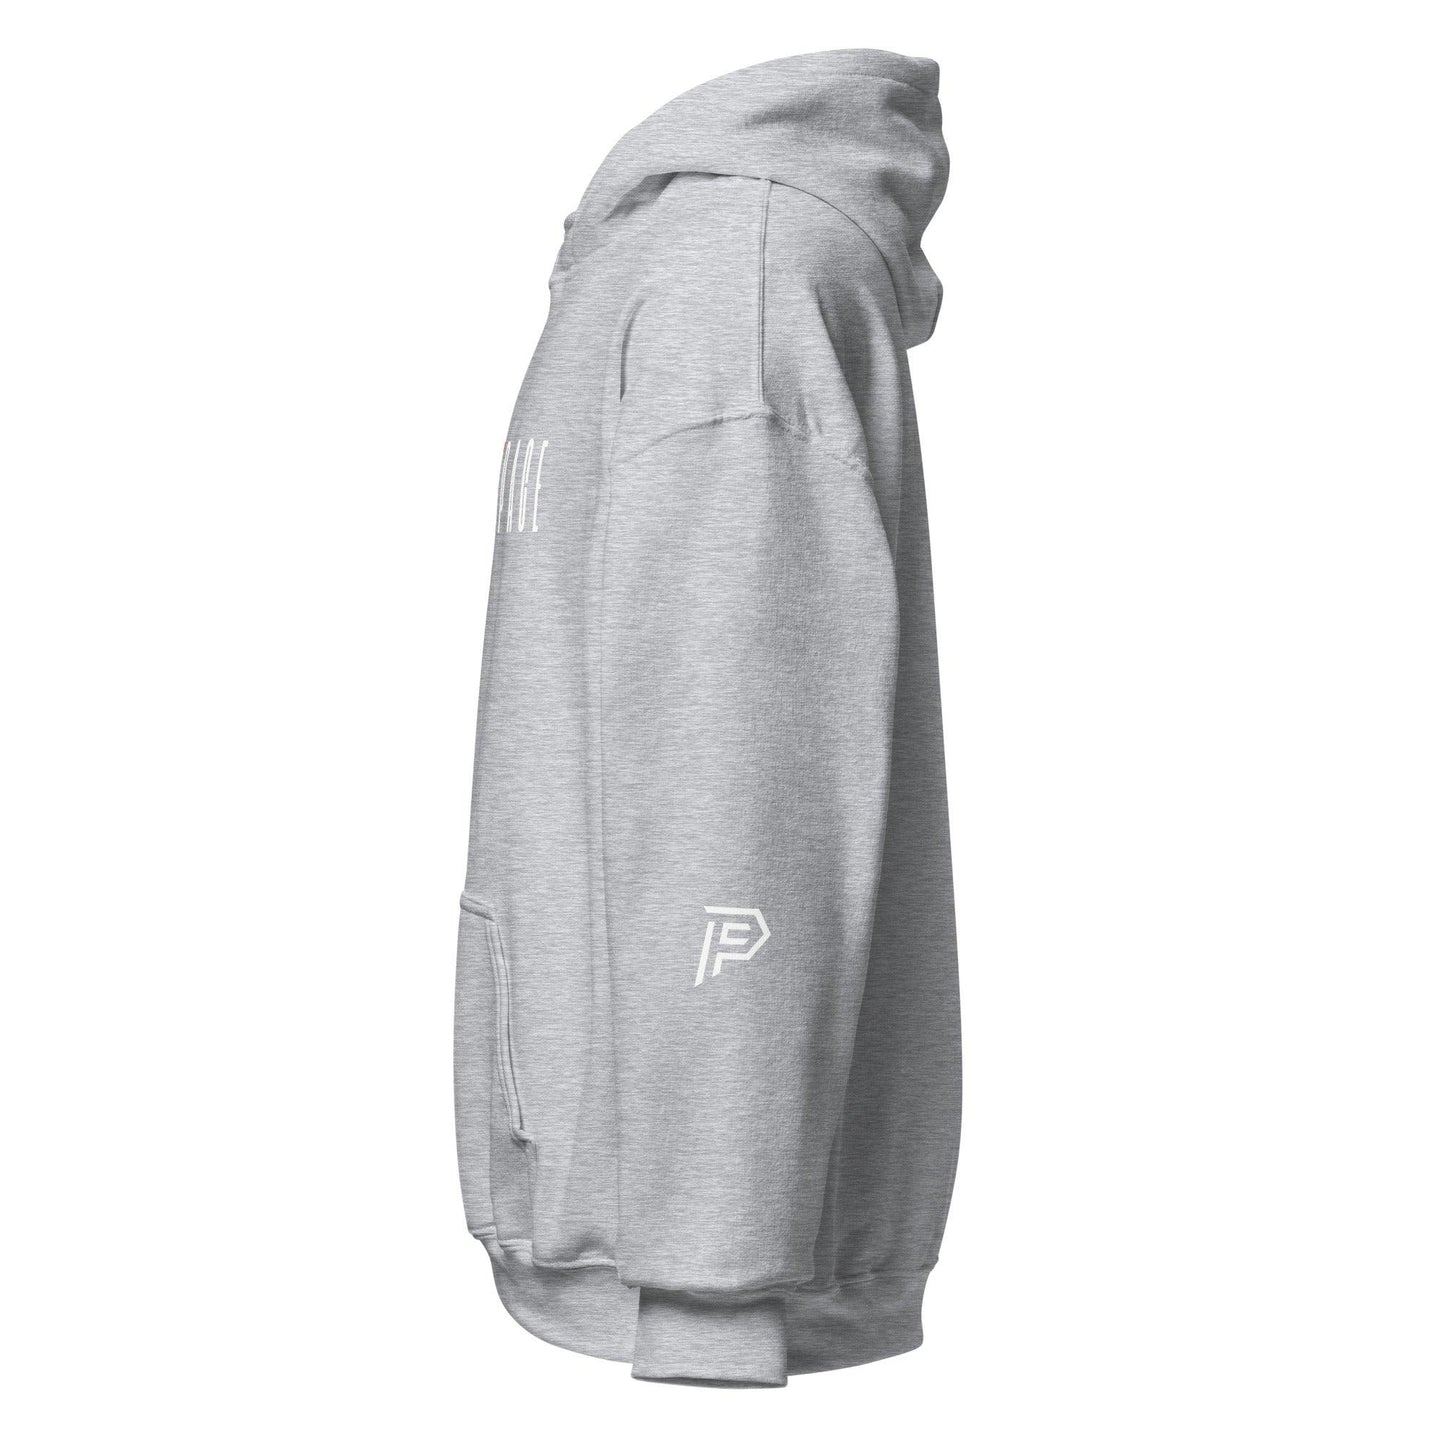 Court Prowess "Solo" Hoodie - Fan Arch